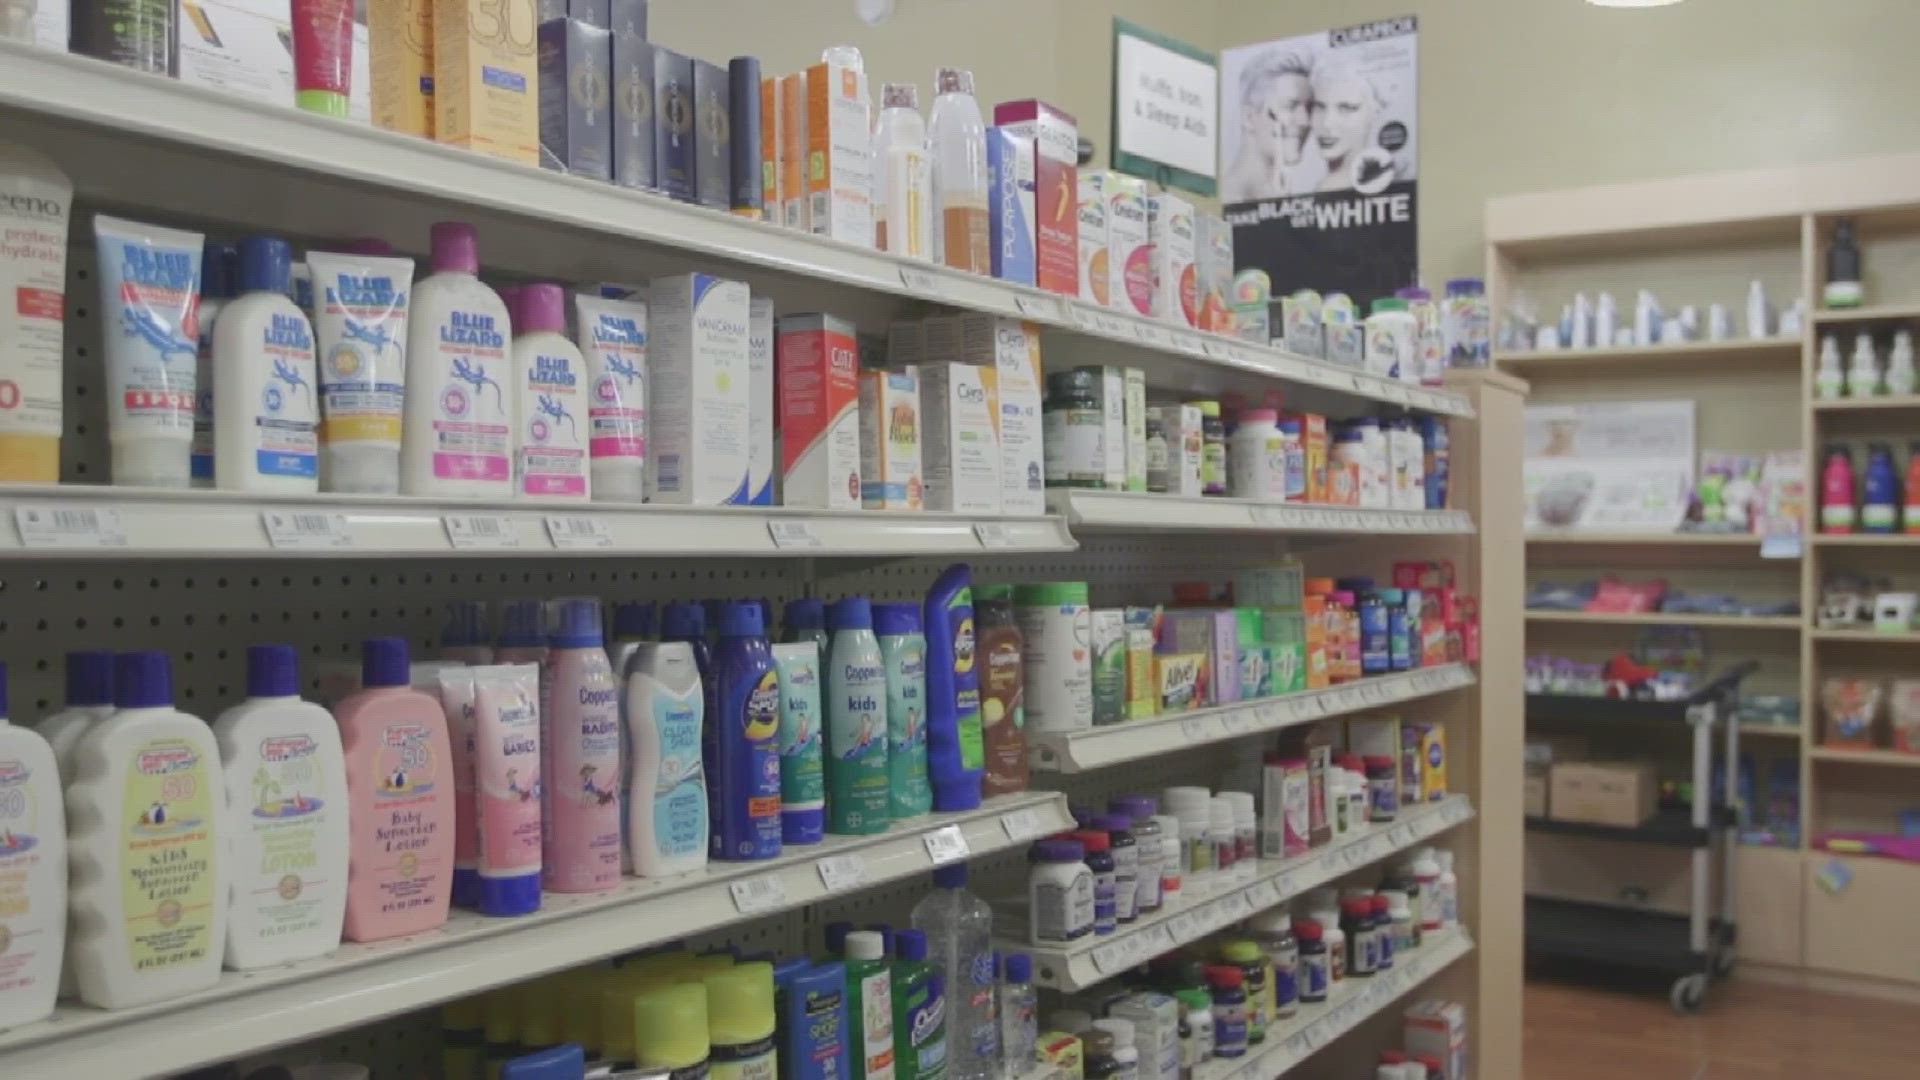 Consumer reports puts sunscreens to the test.